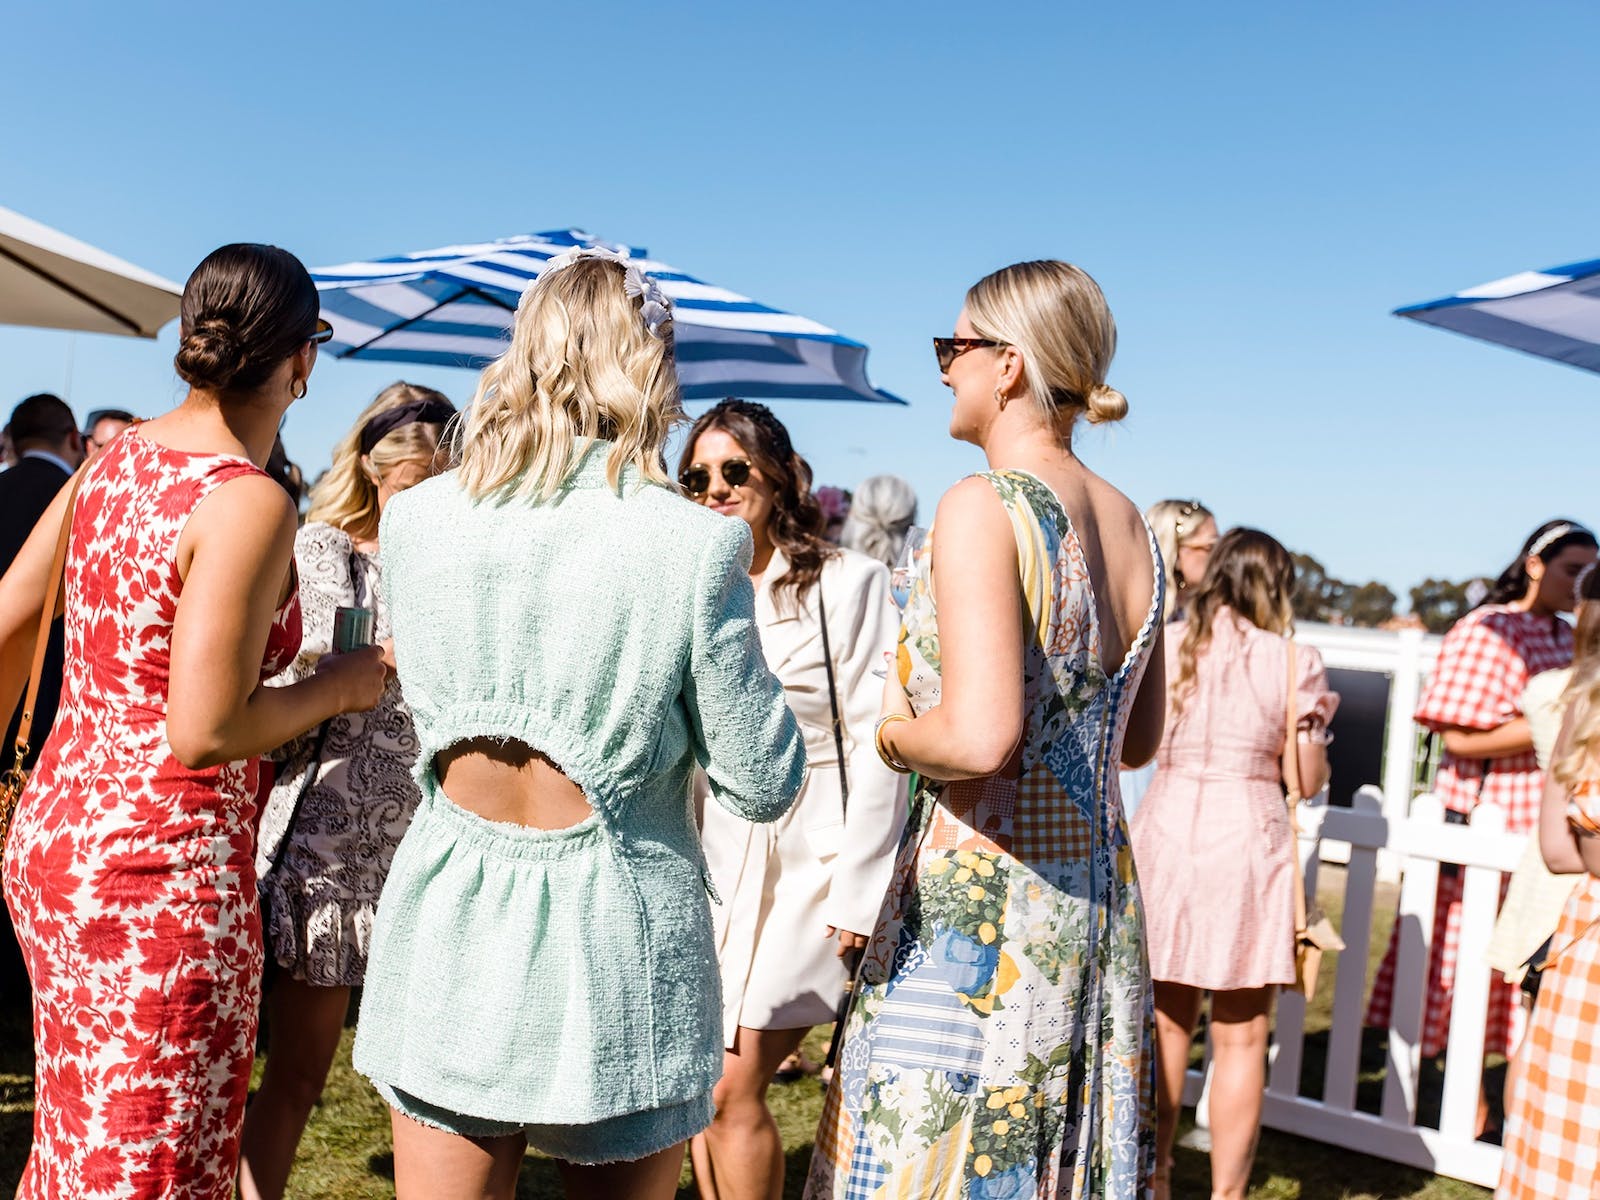 Group of females dressed up at the racing event with blue sky